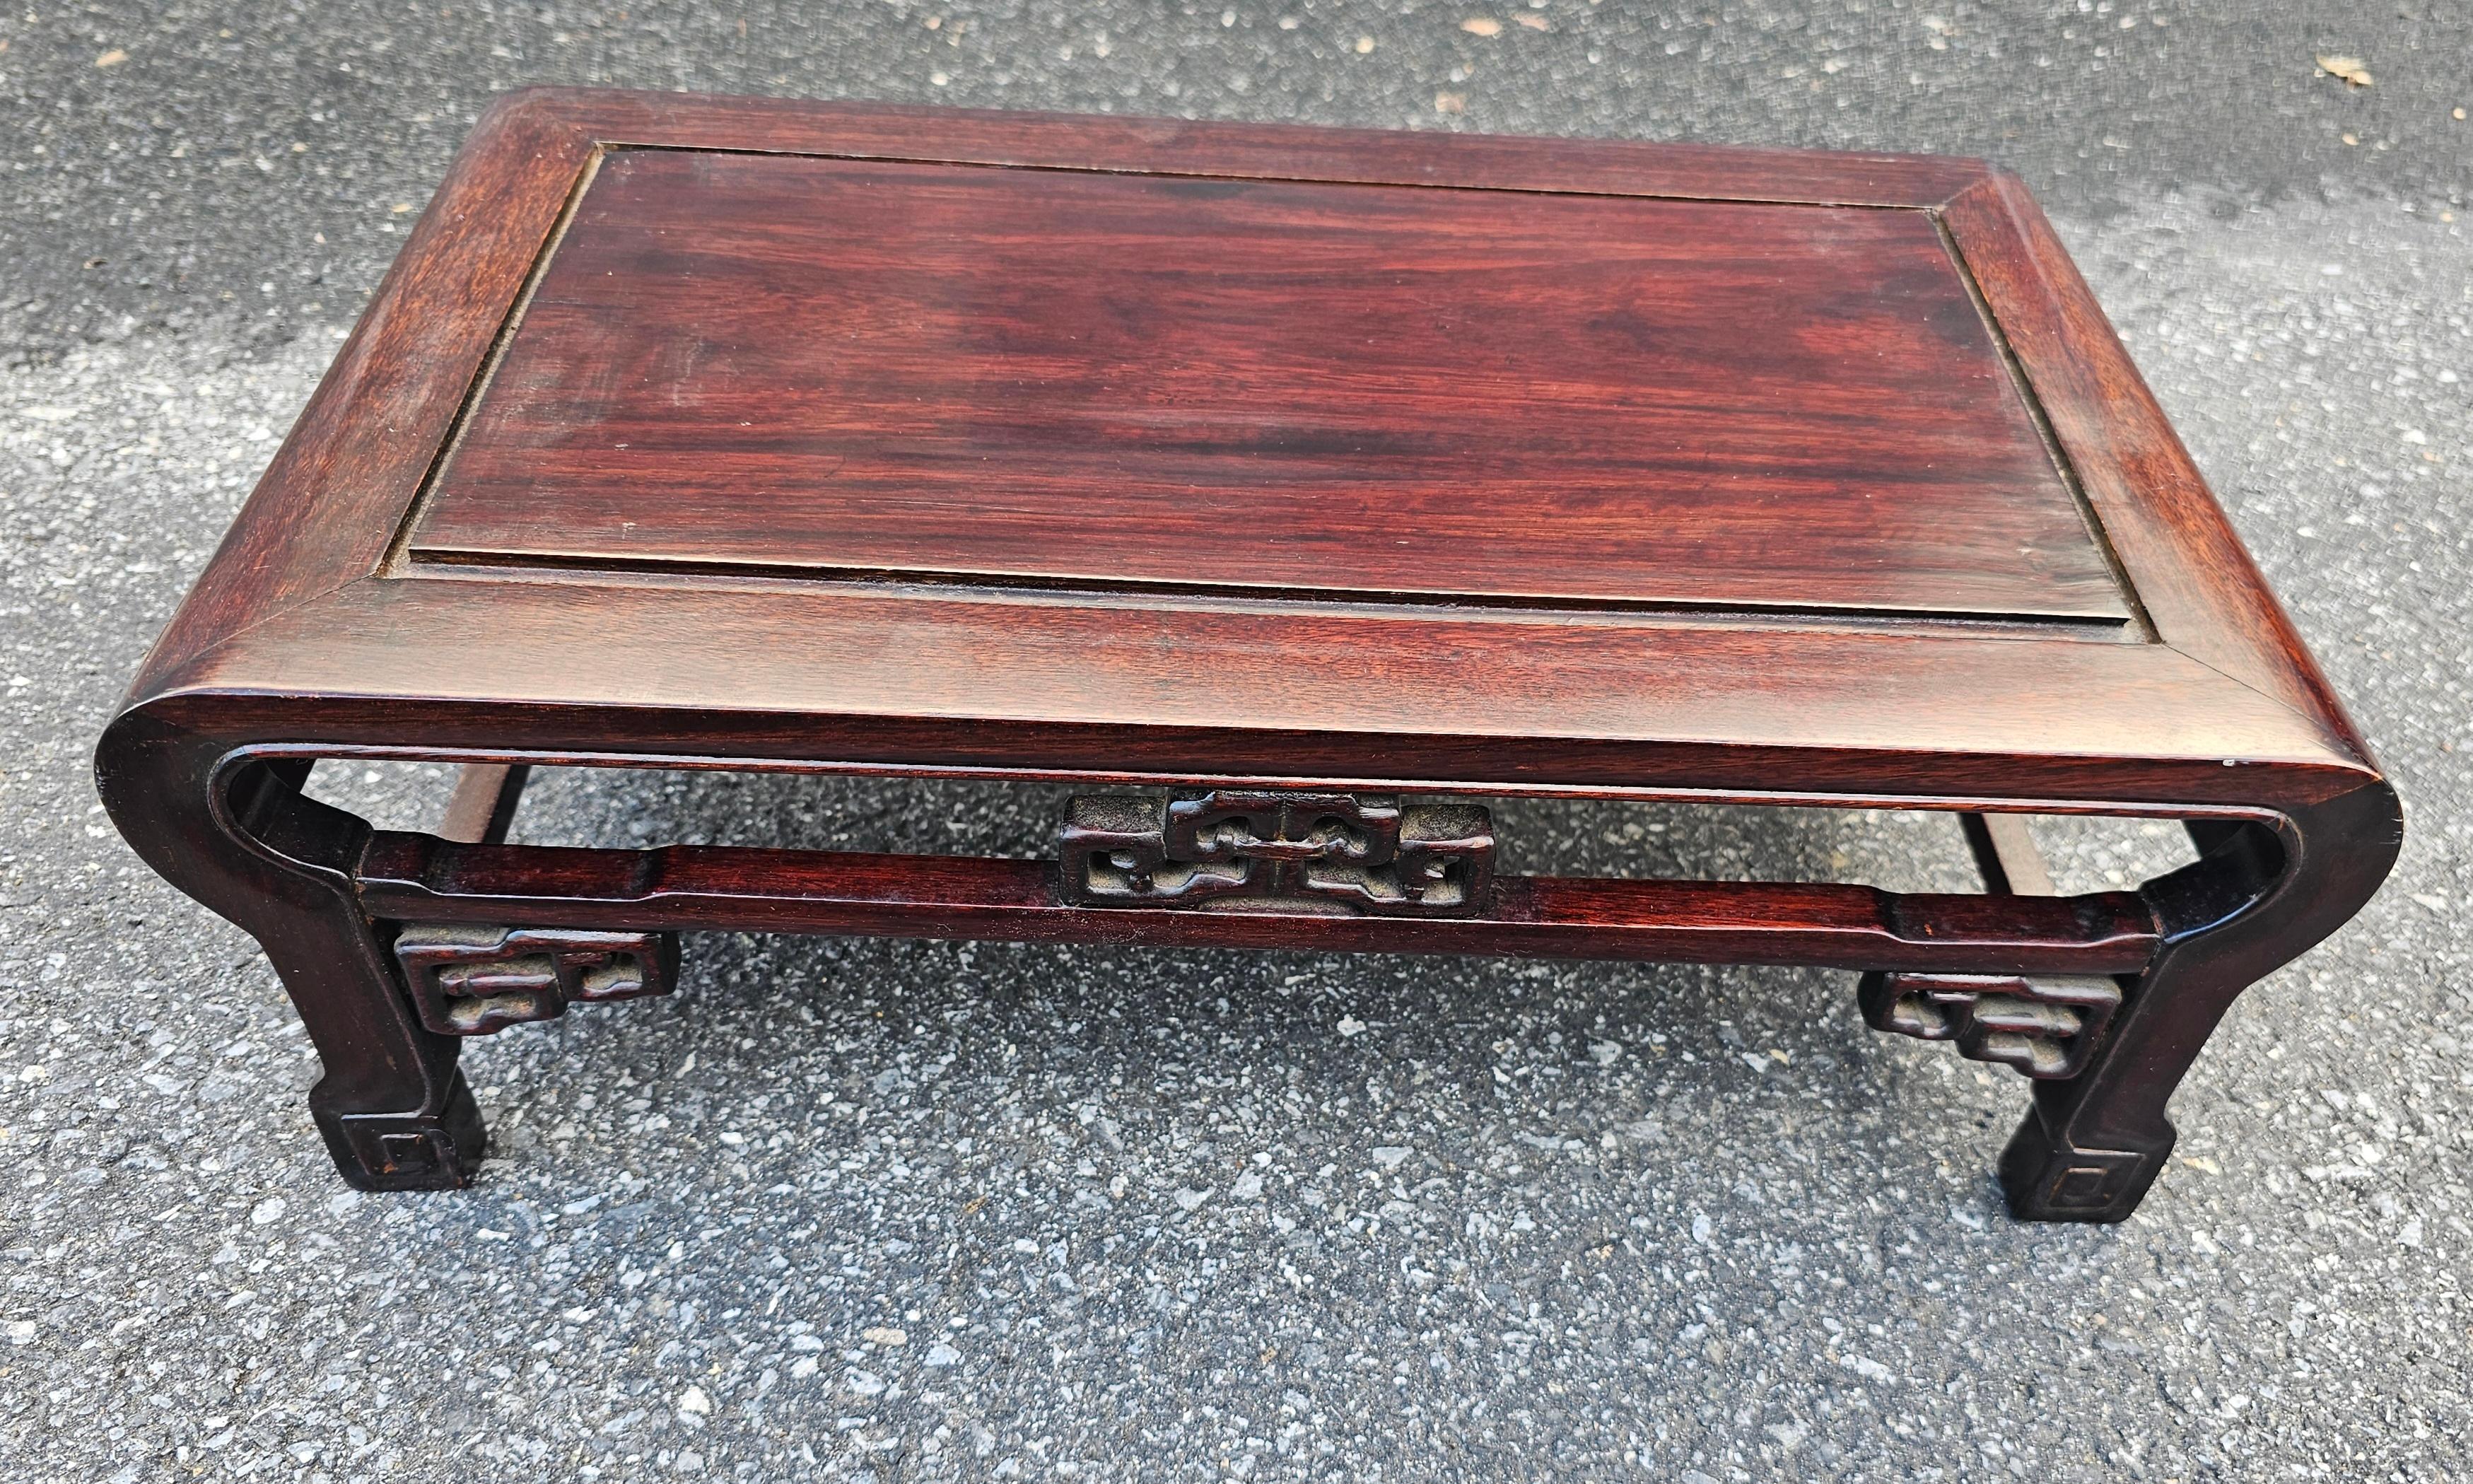 20th Century Chinese Chippendale Rosewood Foot Stool or Bonsai Tree Plant Stand 